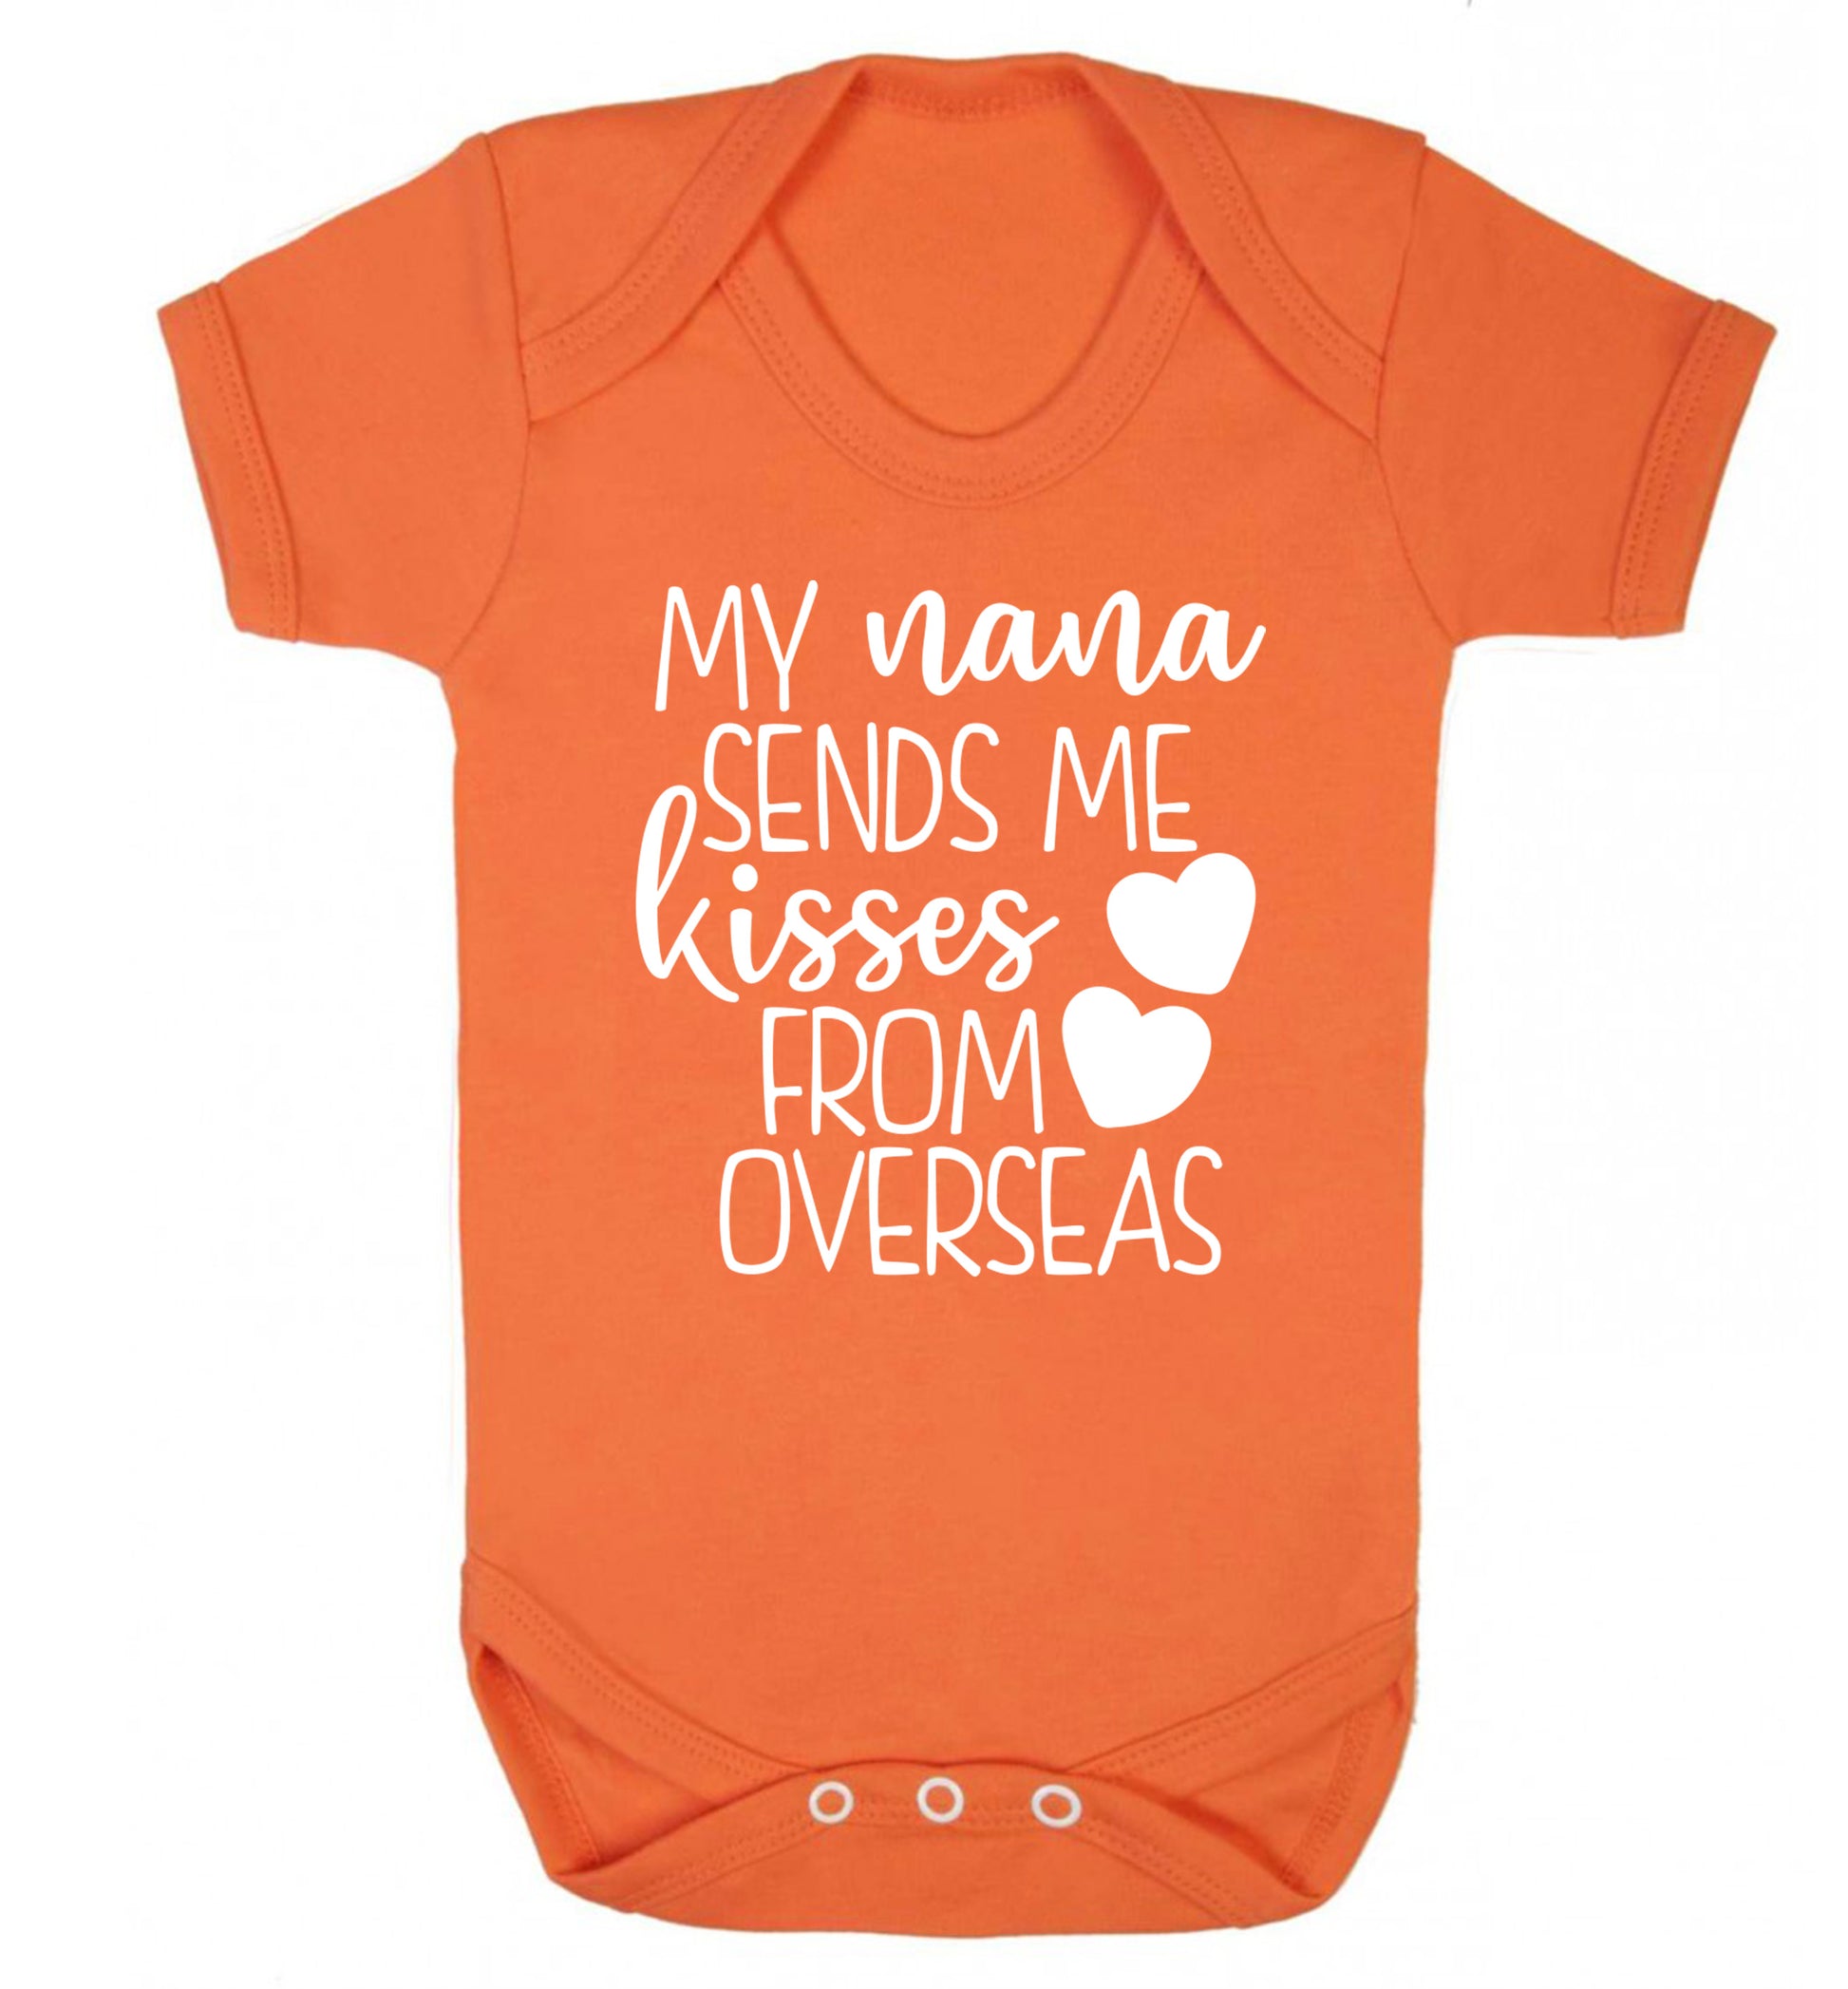 My nana sends me kisses from overseas Baby Vest orange 18-24 months